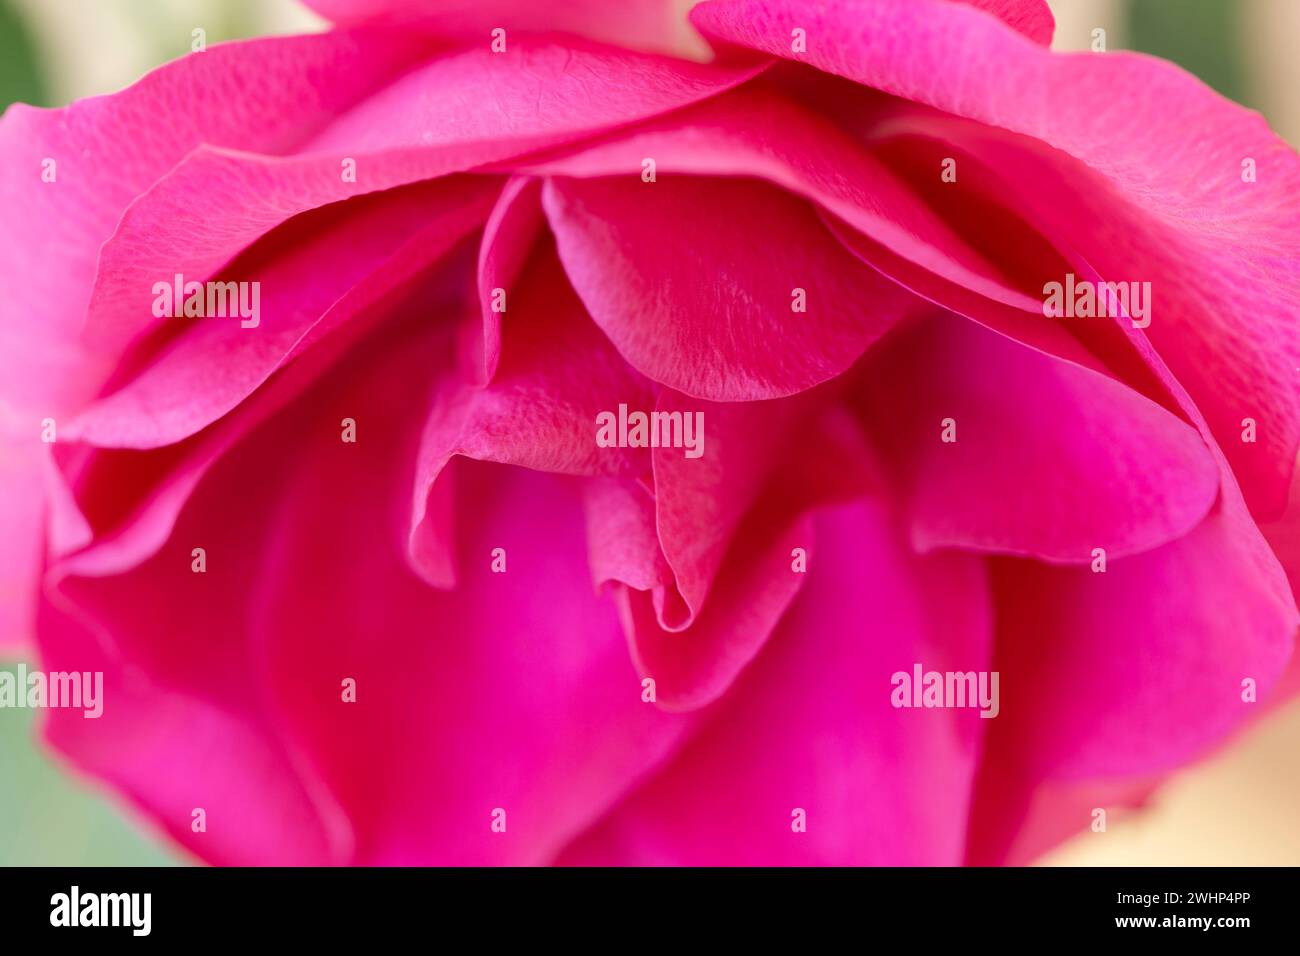 Full frame close-up of pink or magenta rose petals, abstract romance background. Vibrant, bold & sexy color. Good for poster or canvas art in bedroom. Stock Photo